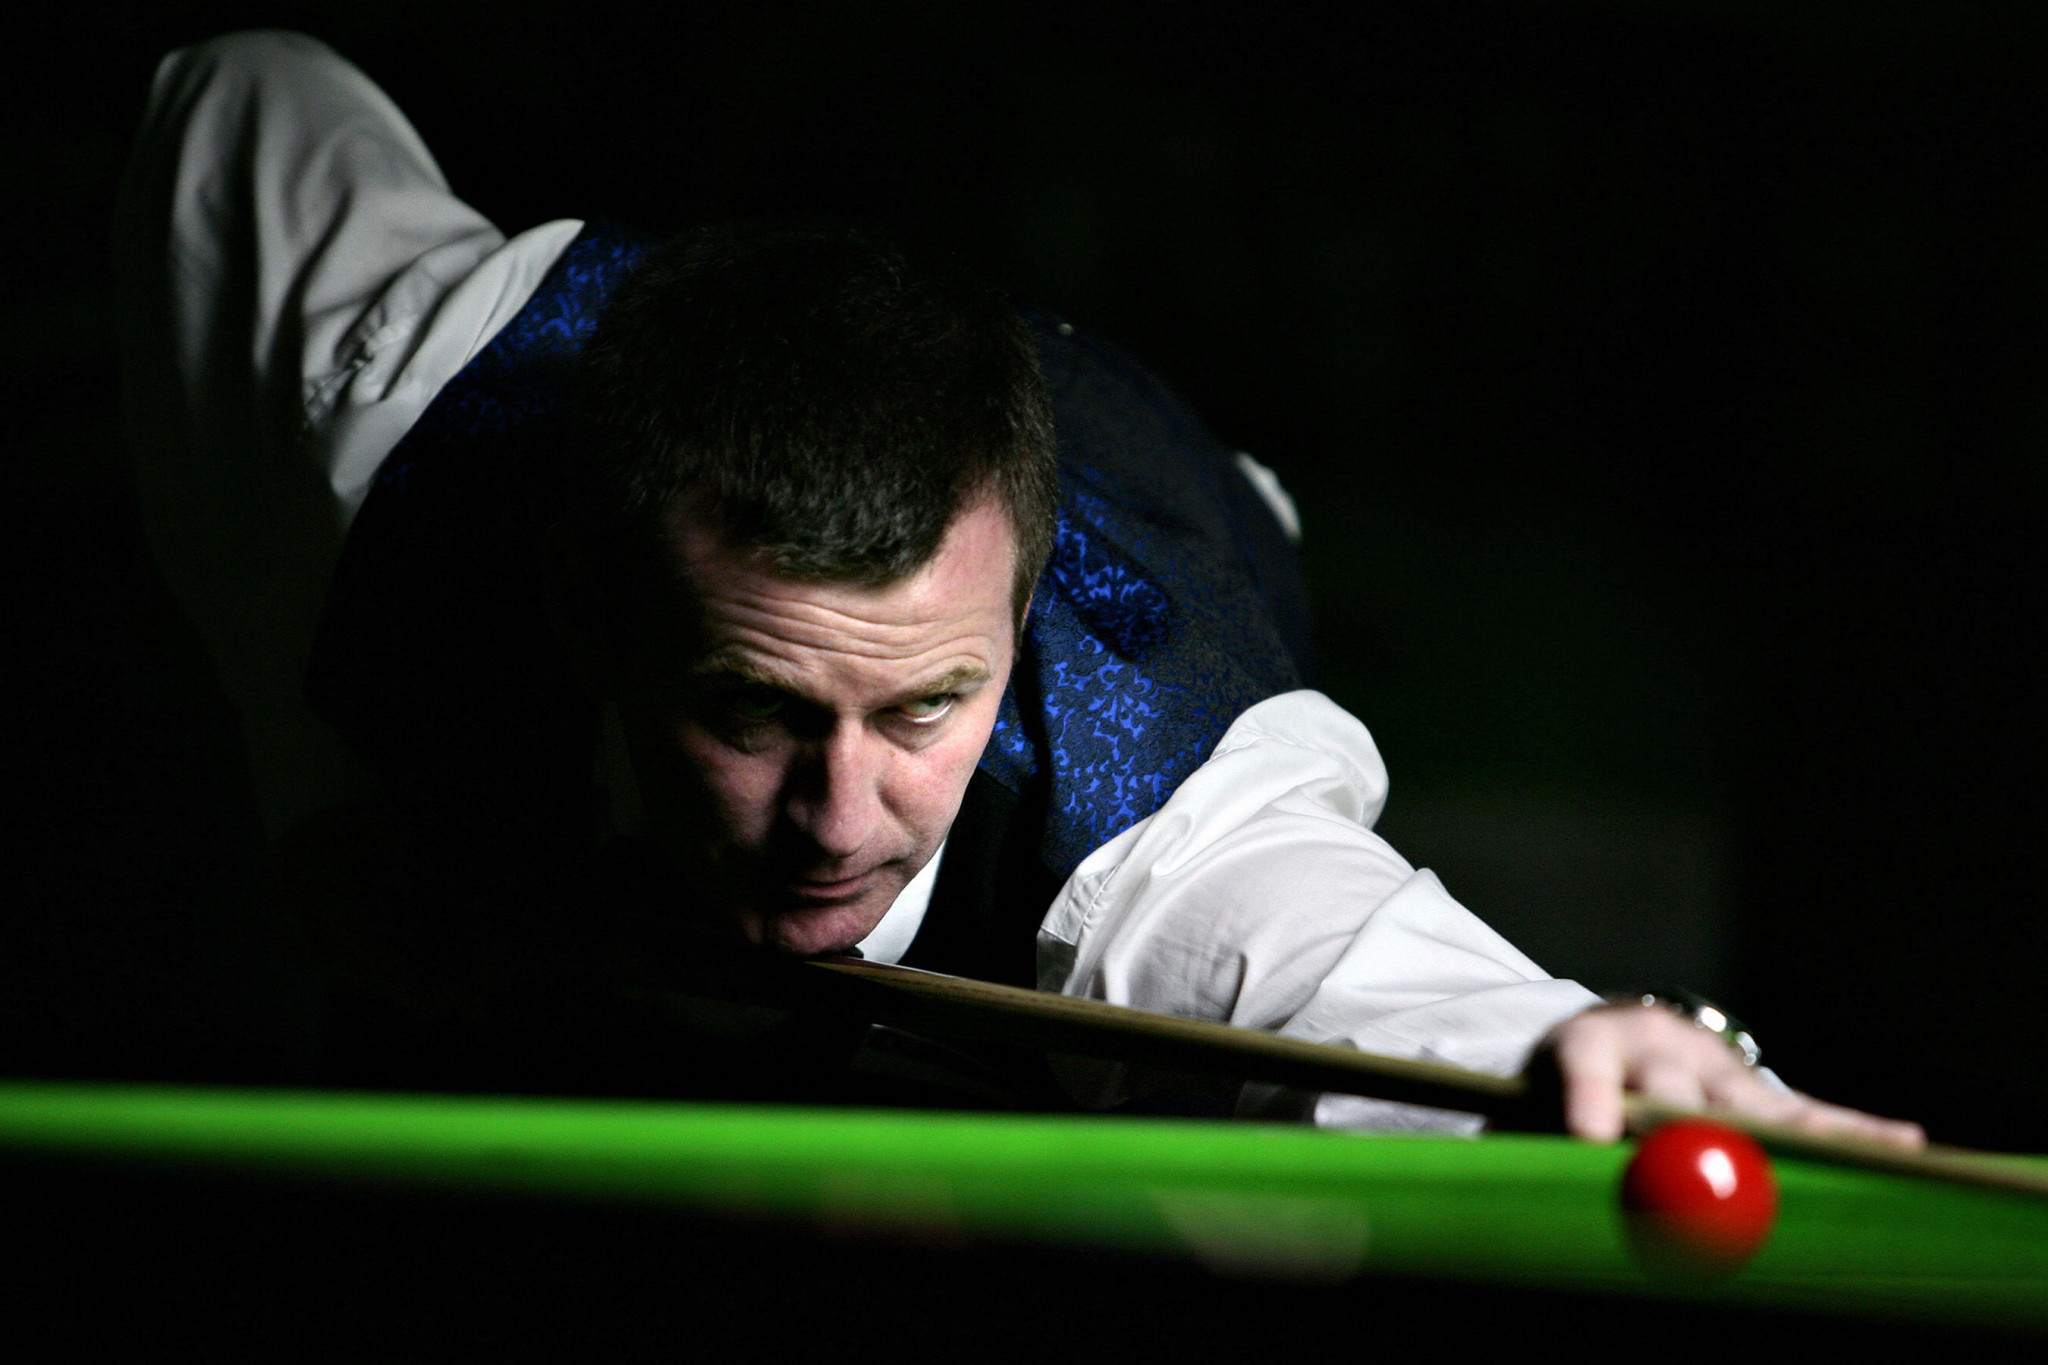 Singapore's Peter Gilchrist is yet to be beaten at the World Billiards Championship ©Getty Images